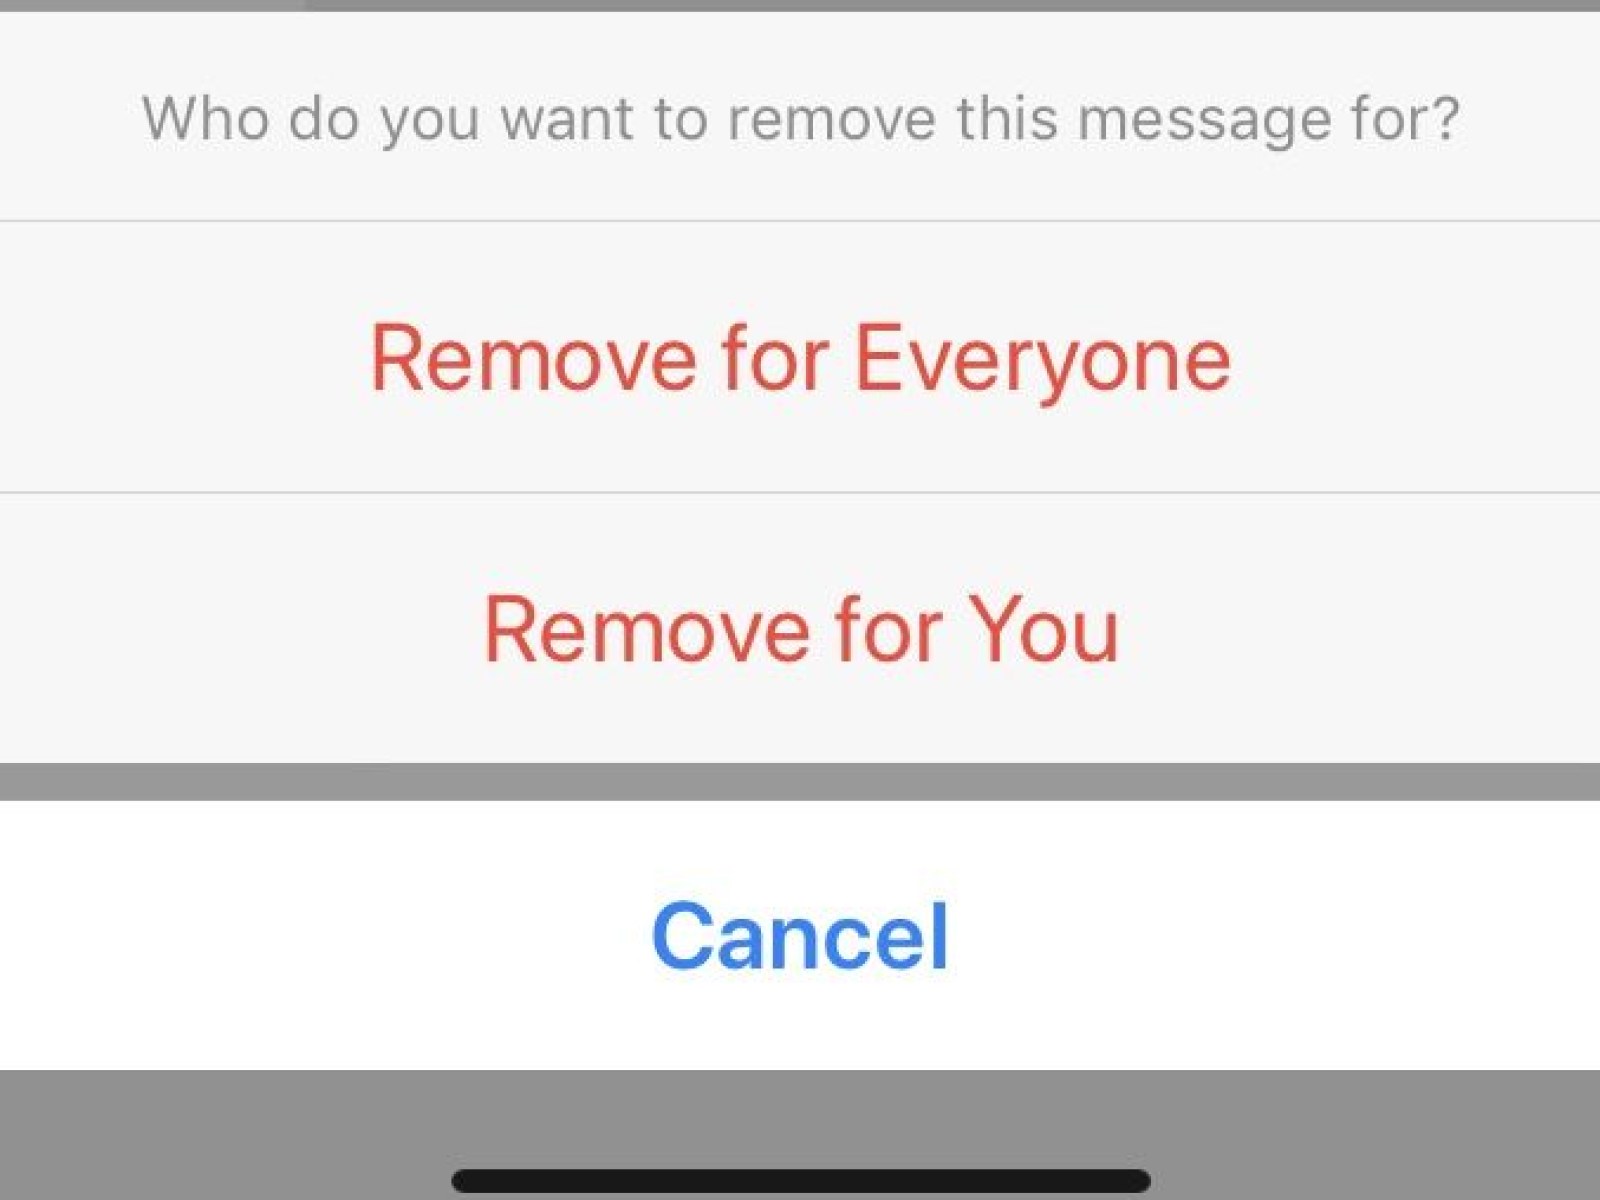 Unsend: How to Remove or Delete Sent Messages in Facebook Messenger